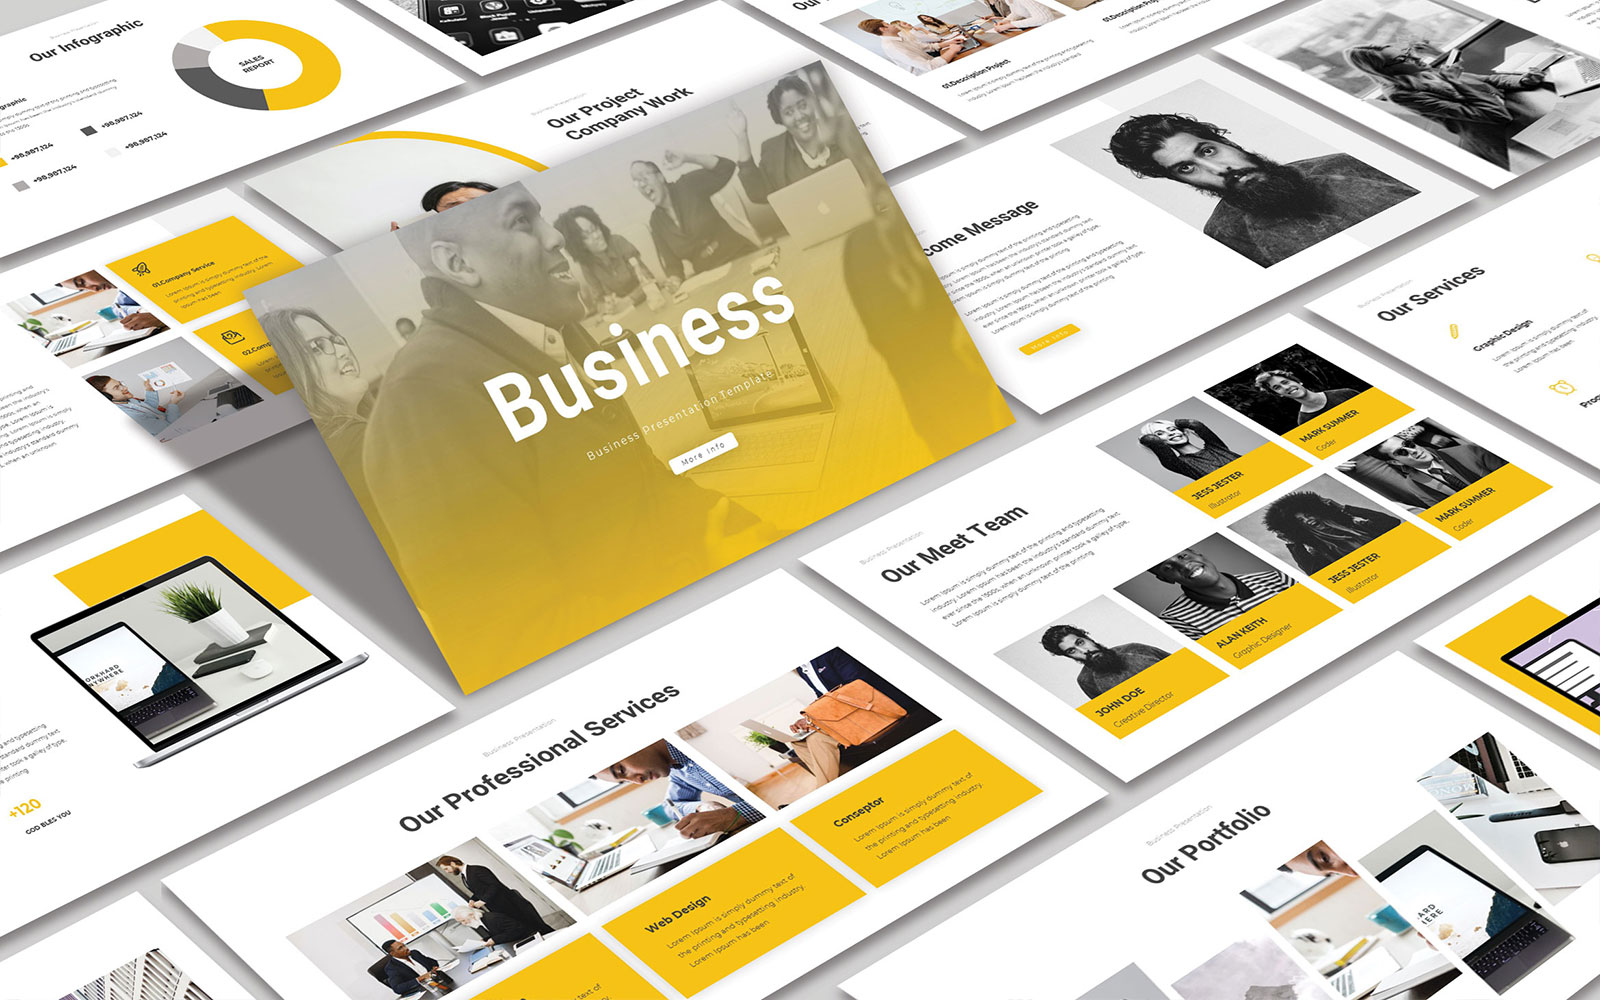 Template #339314 Business Clean Webdesign Template - Logo template Preview